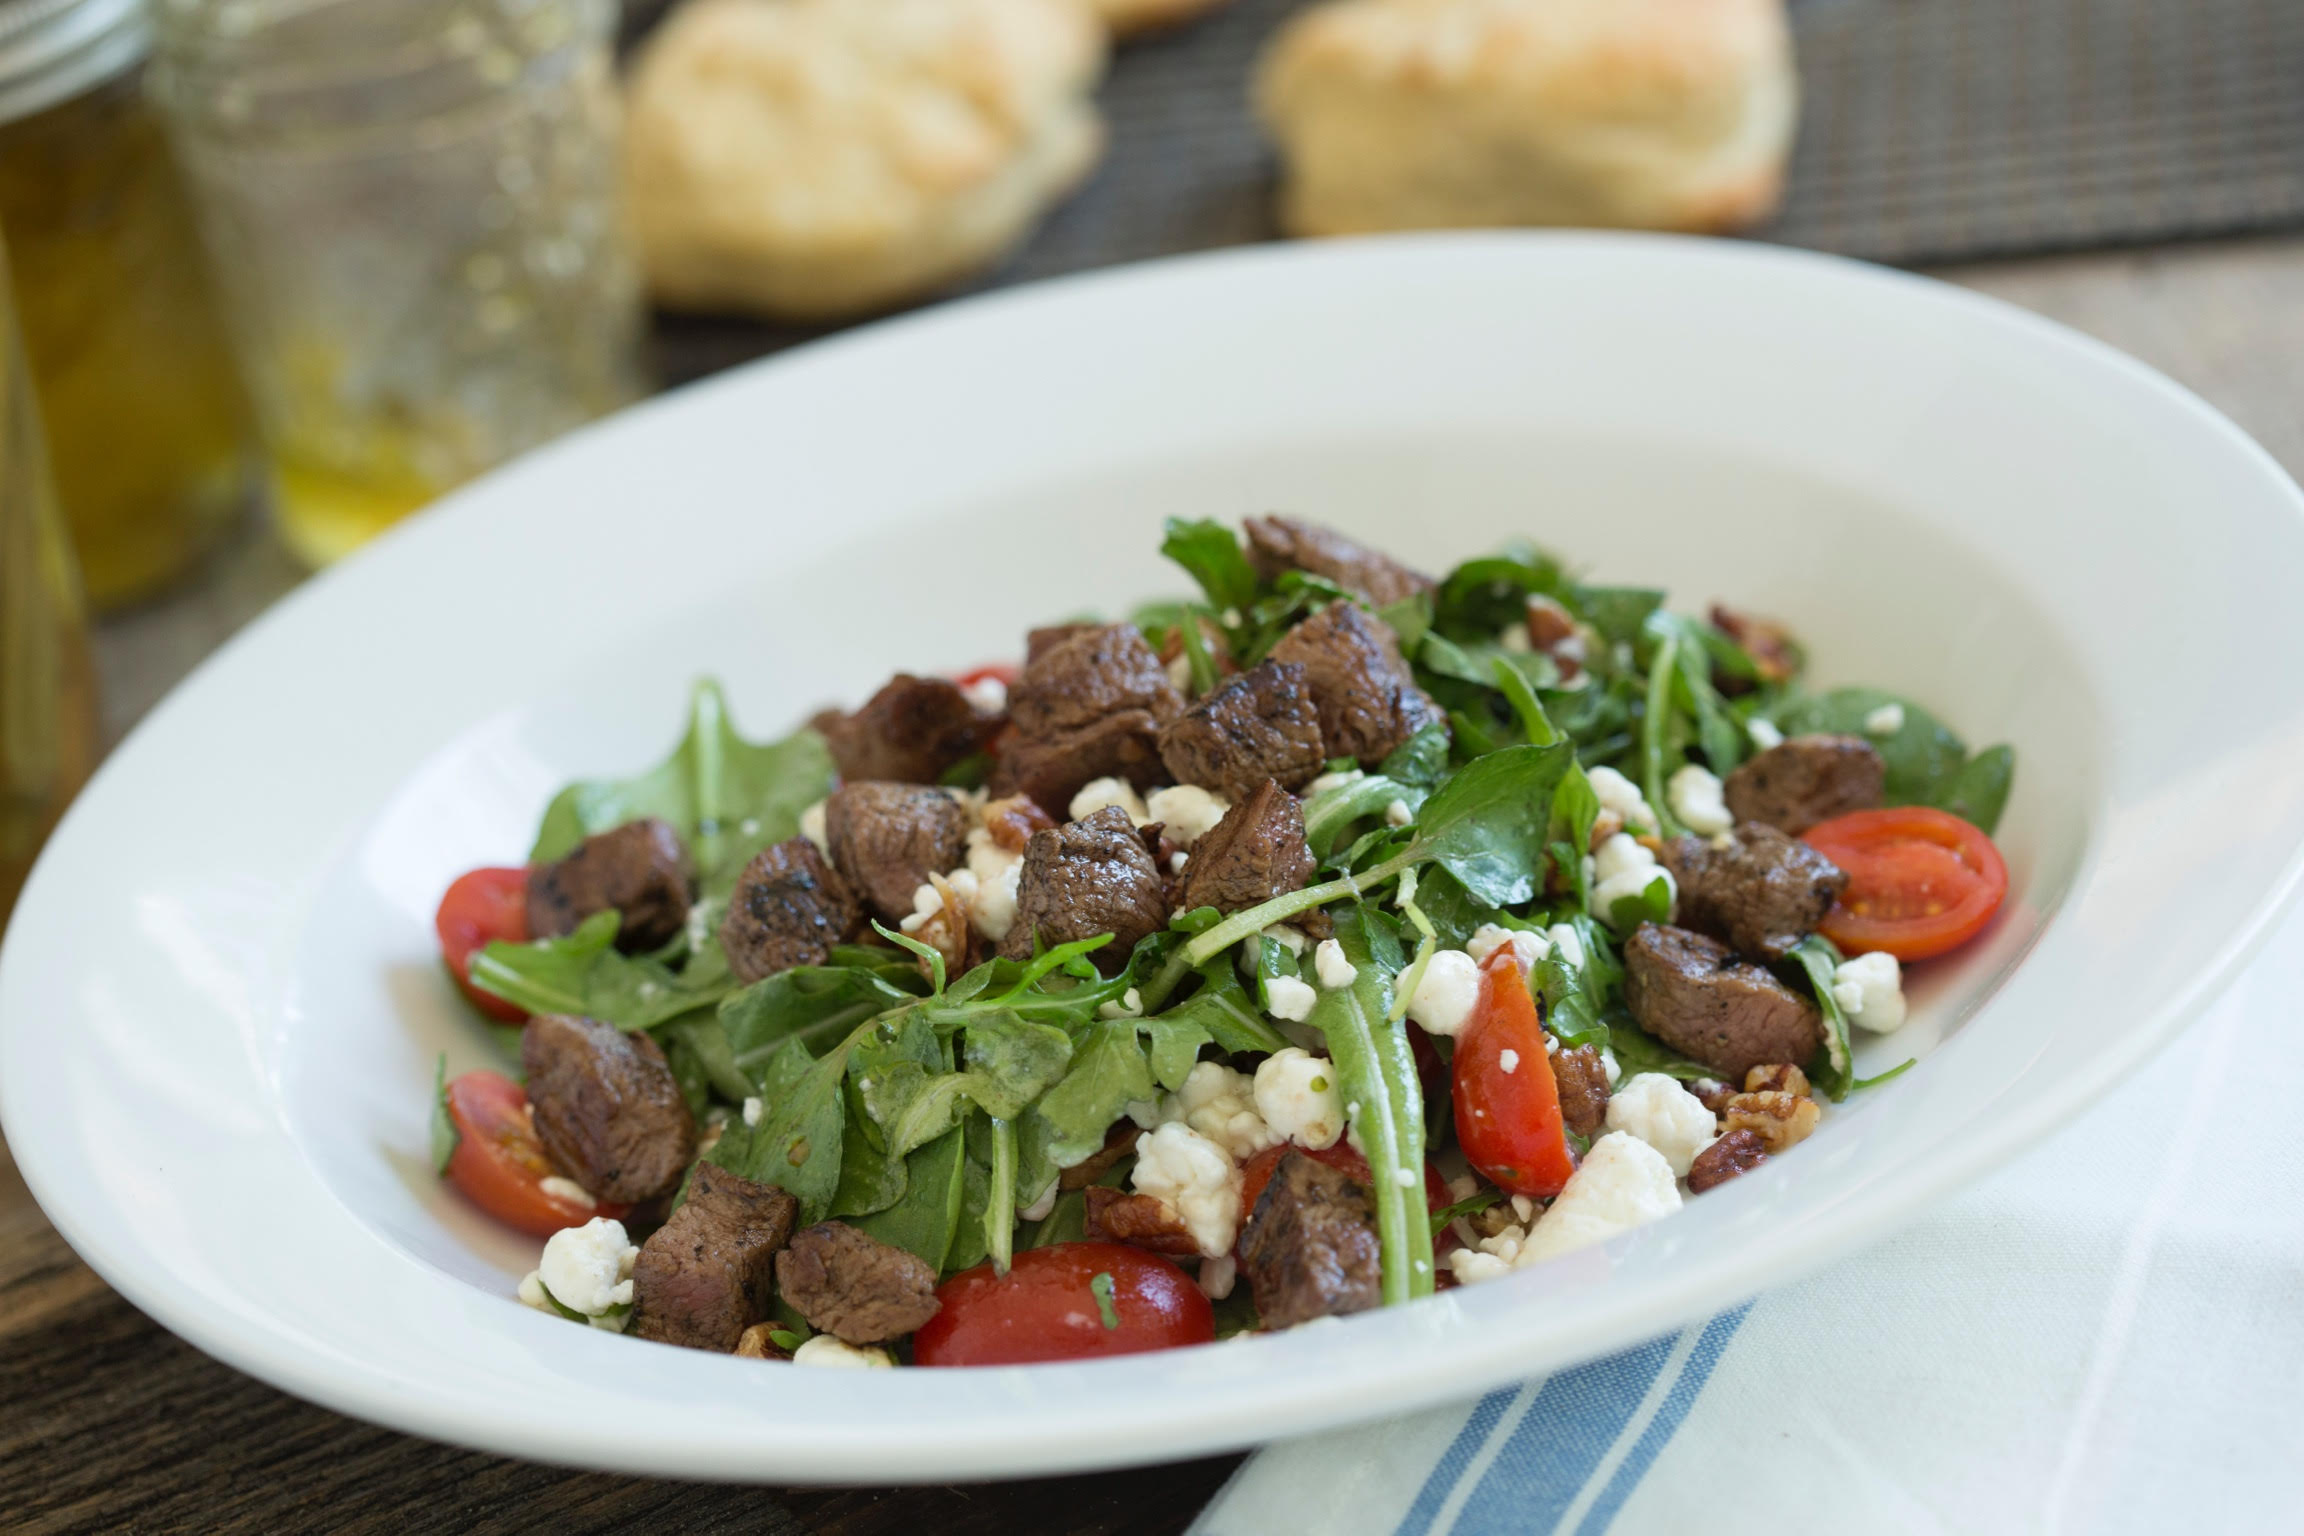 Lowcountry Recipe: Rustic Table’s “Steak Salad”